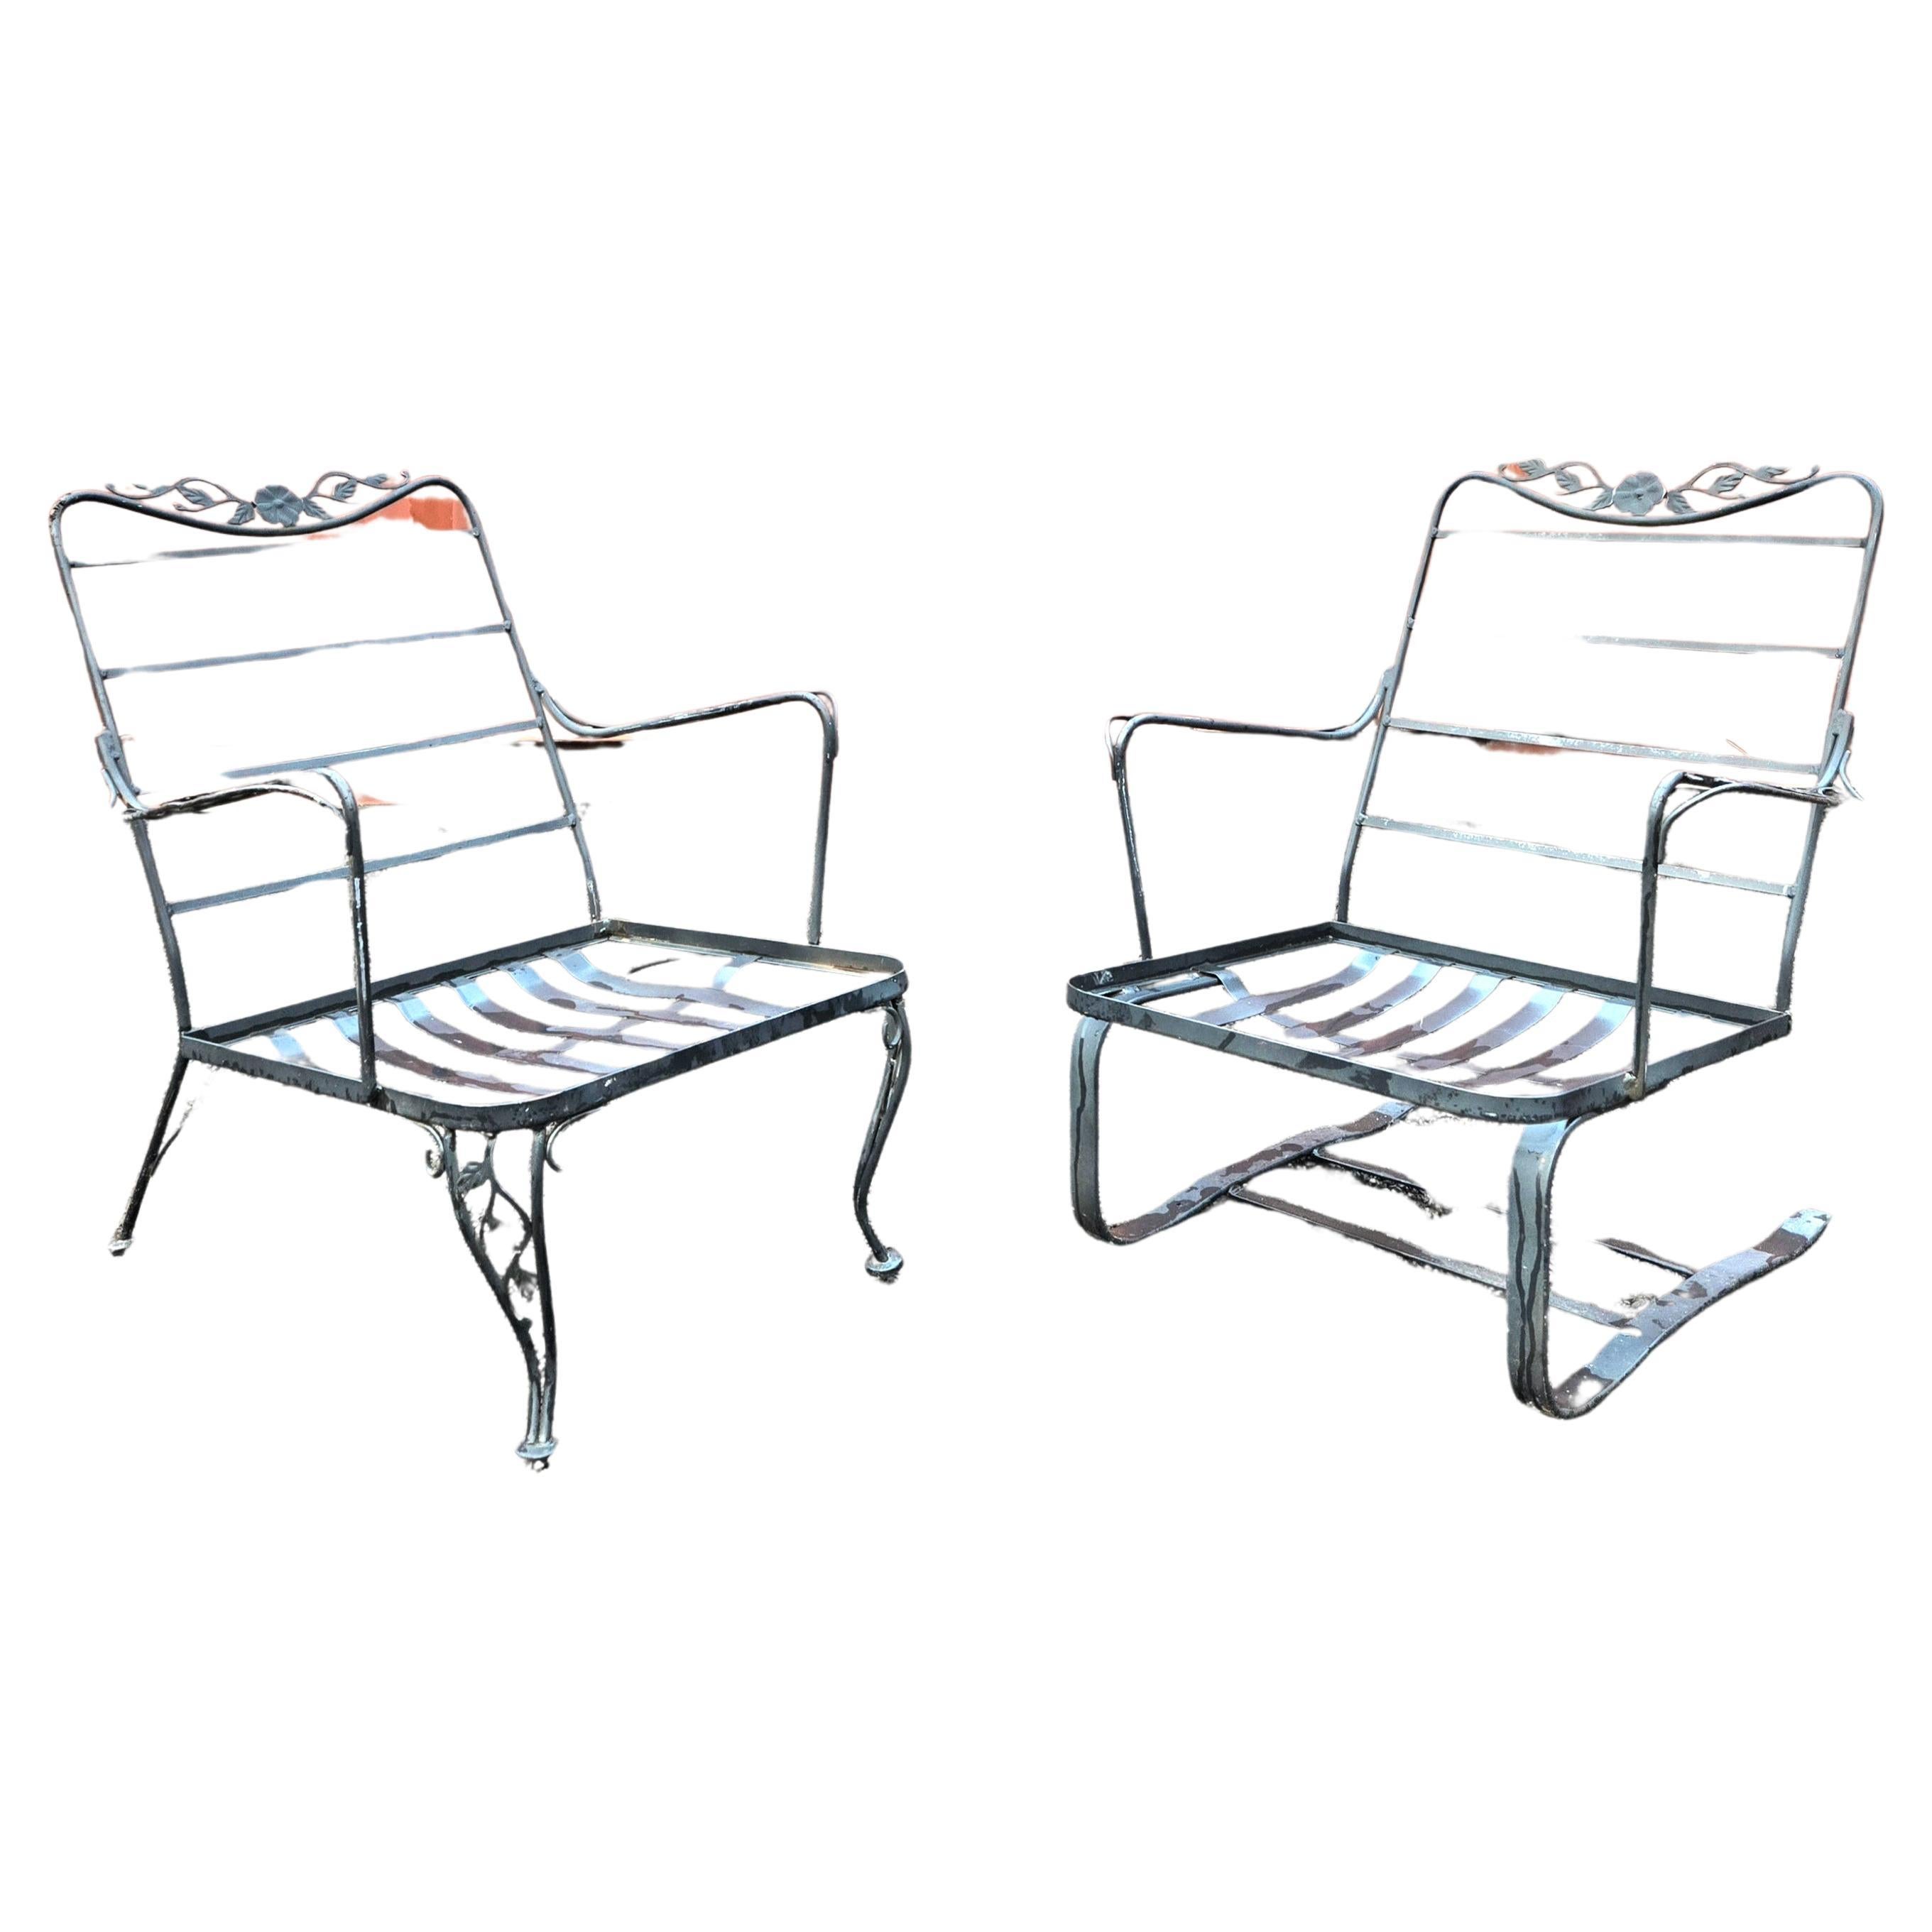 Wrought Iron Lounge Chairs For Sale